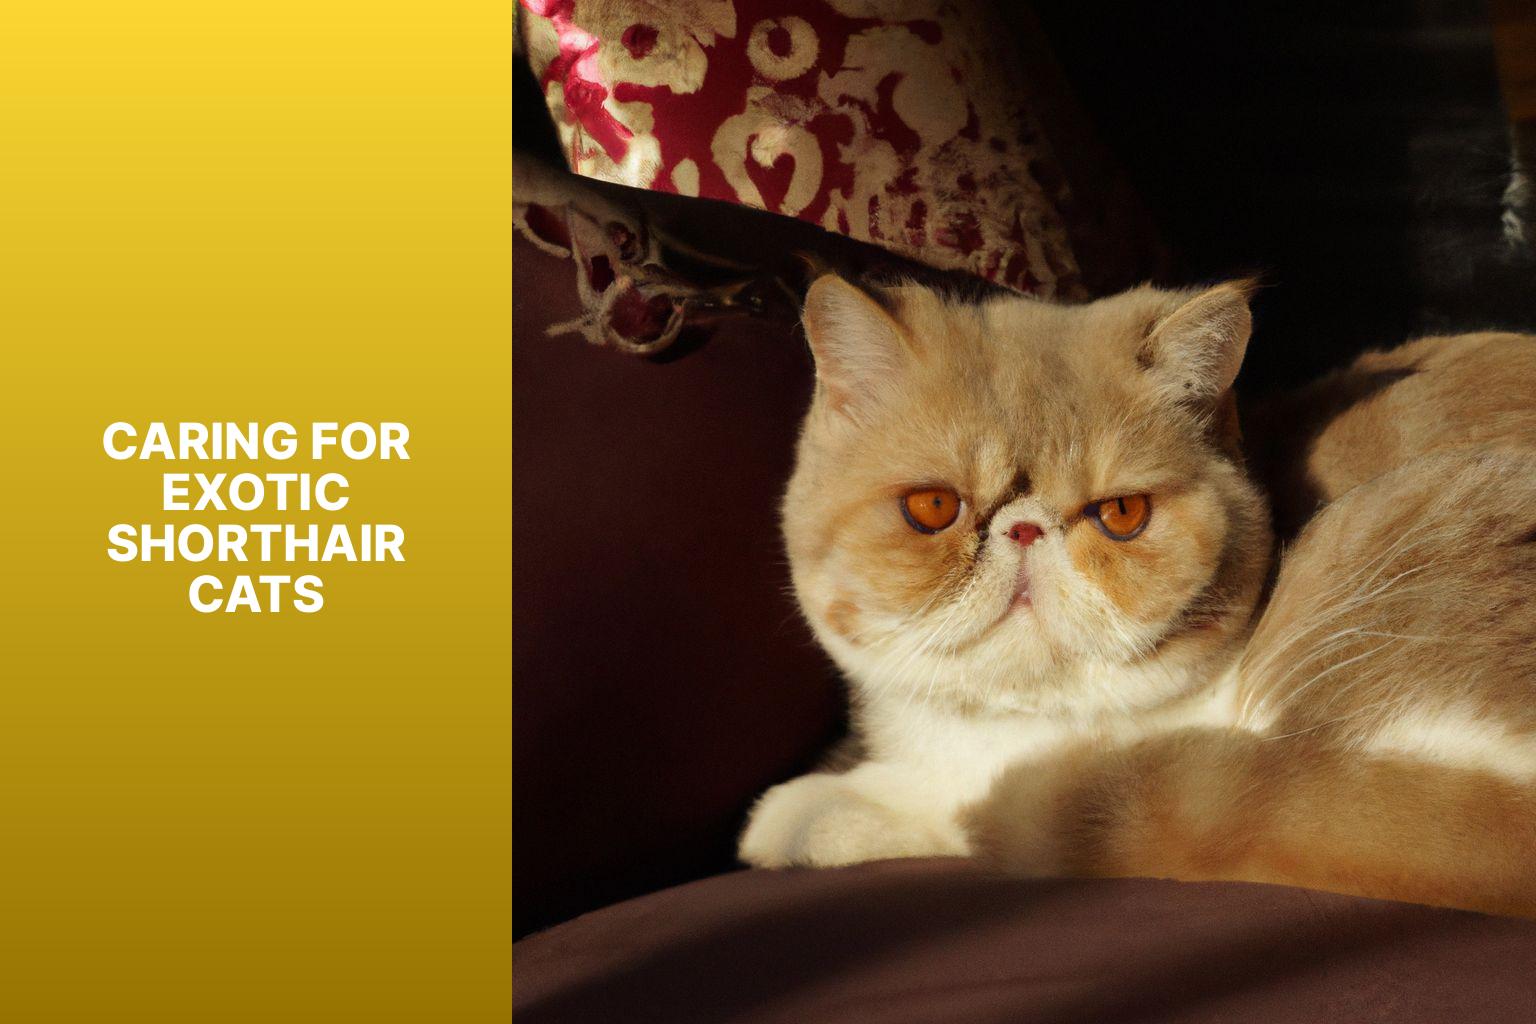 Caring for Exotic Shorthair Cats - what is an exotic shorthair cat 